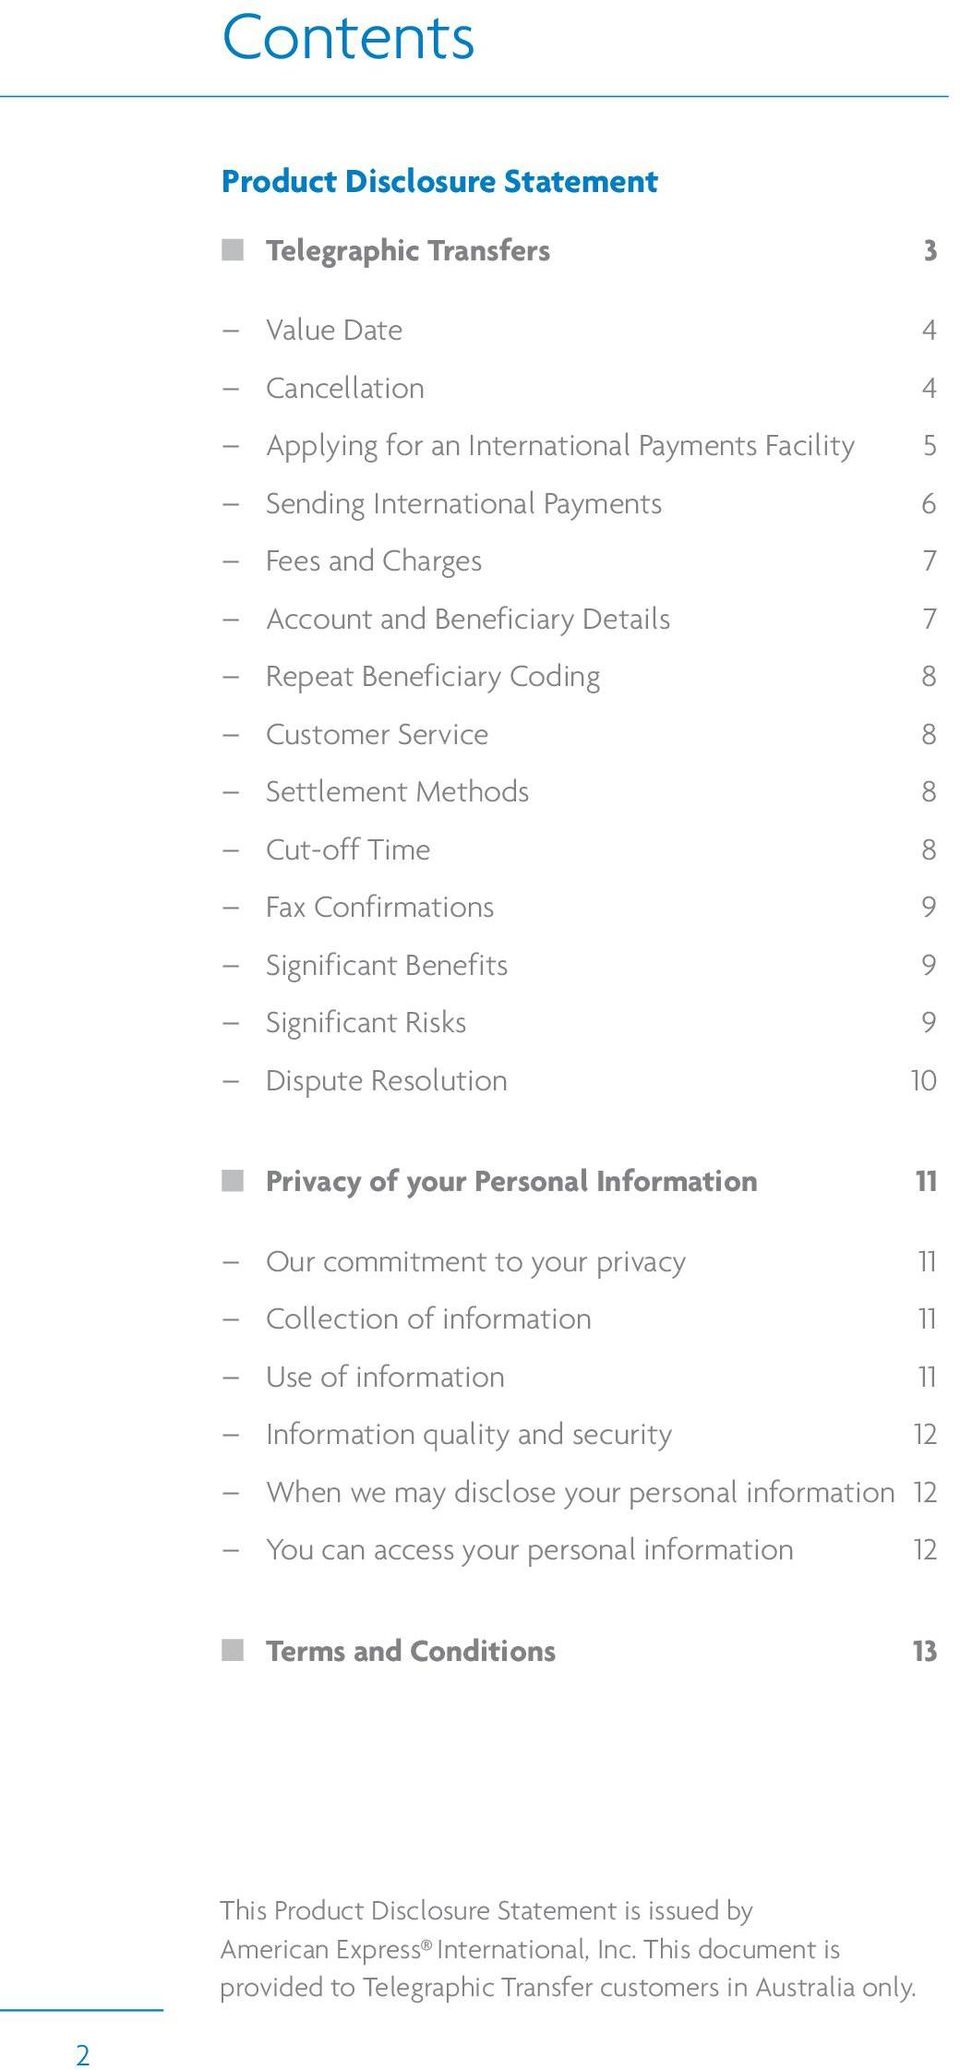 Privacy of your Personal Information 11 Our commitment to your privacy 11 Collection of information 11 Use of information 11 Information quality and security 12 When we may disclose your personal